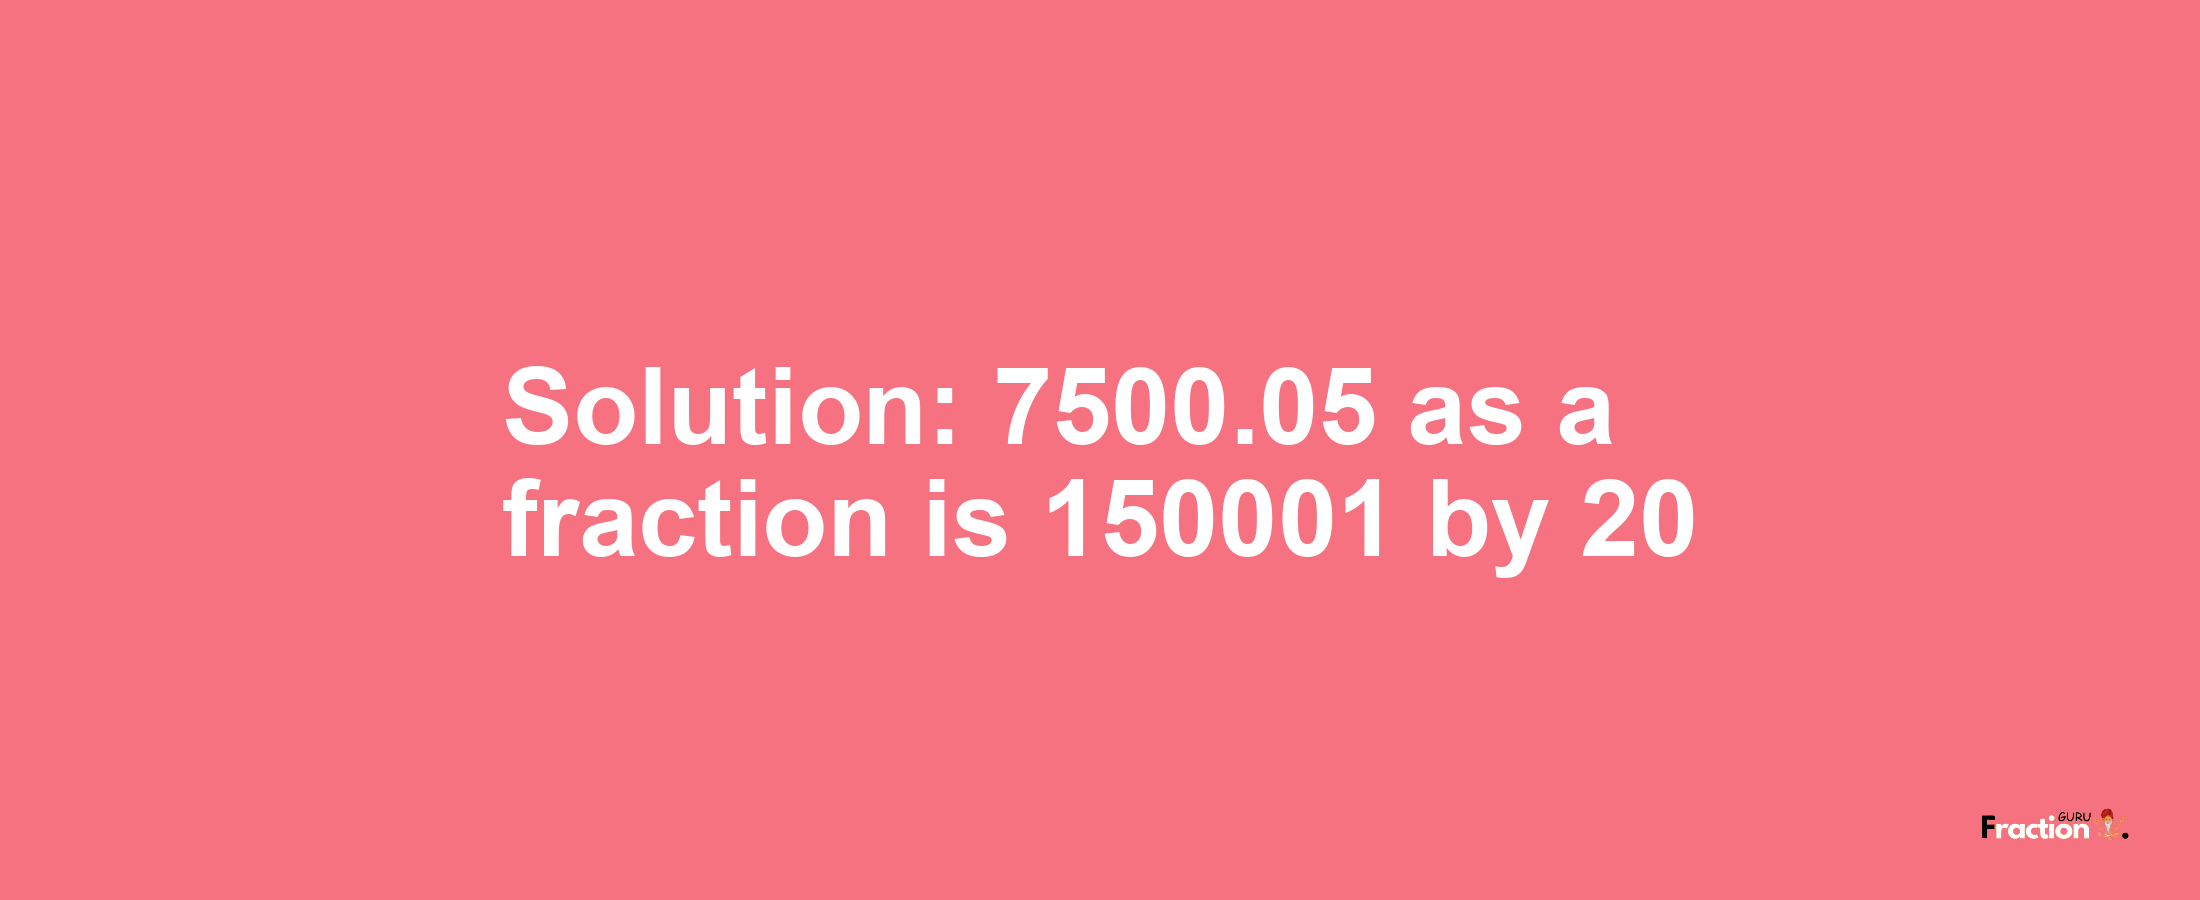 Solution:7500.05 as a fraction is 150001/20